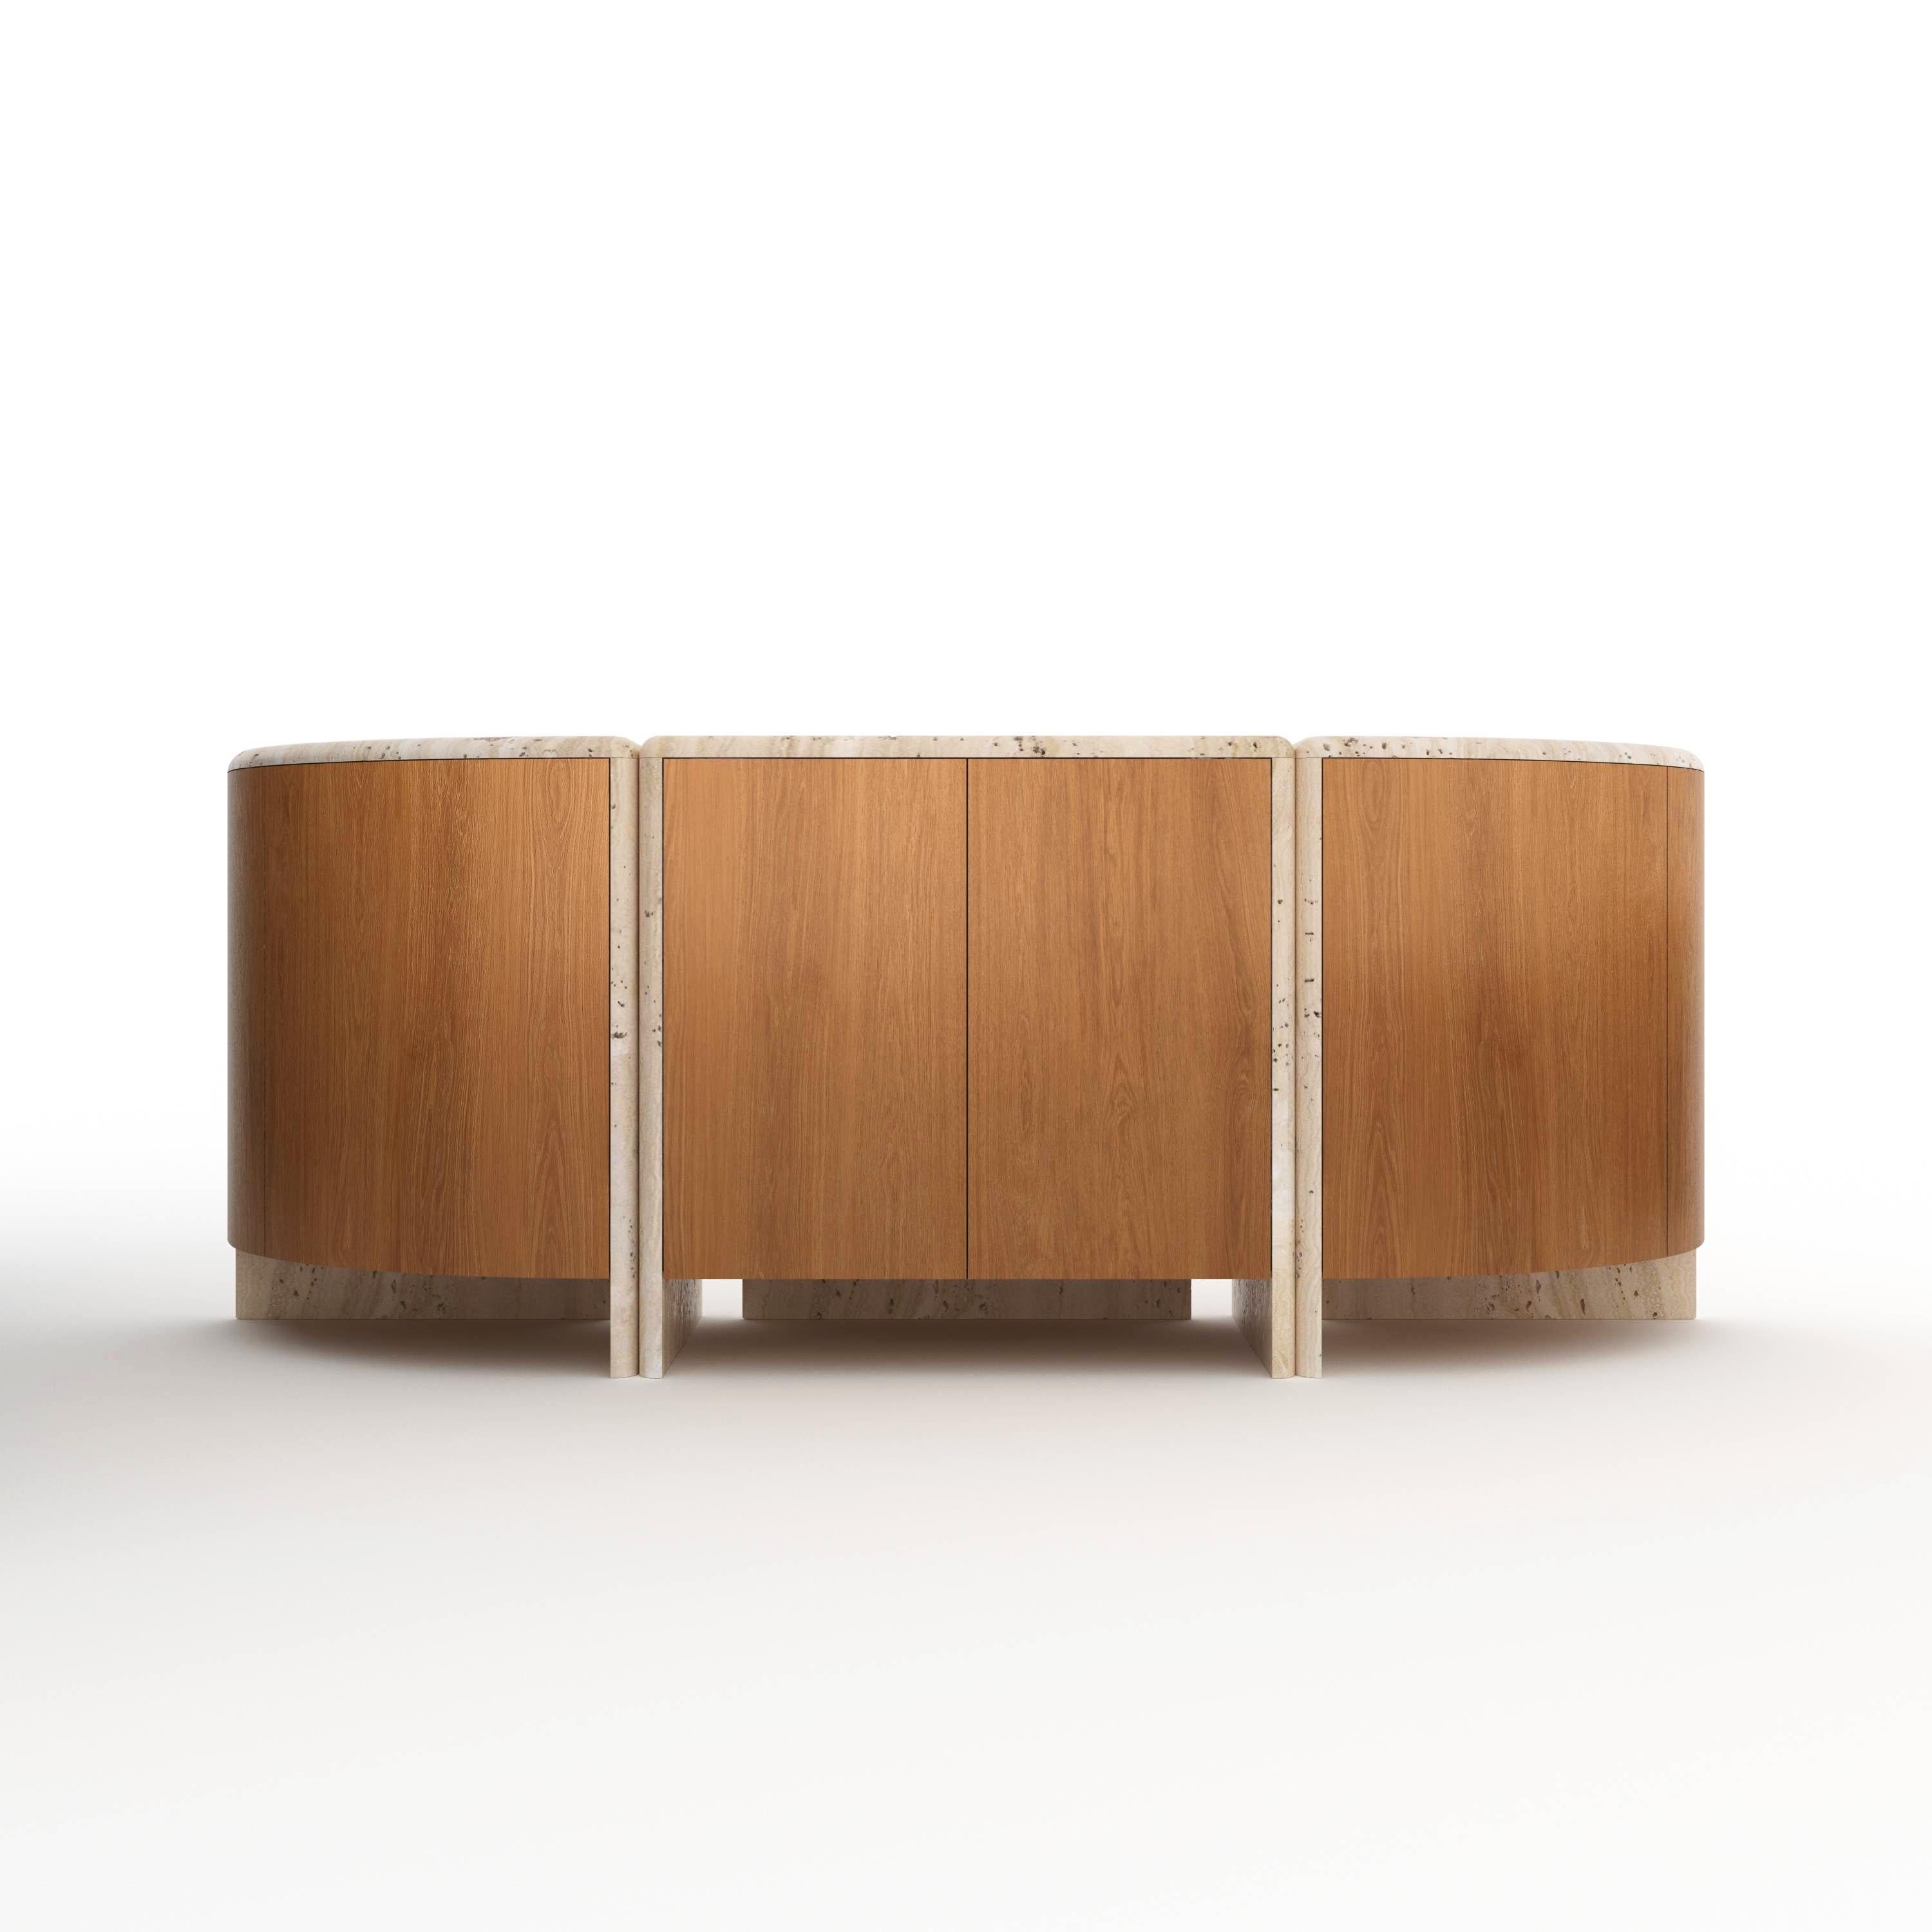 A credenza inspired by giant water lily pads and their curled rims, handmade out of 30 mm thick honed unfilled Navona Travertine with rounded, juxtaposed edges and Oak.
Available in any size and material of choice.

About Fred&Juul:

Fred&Juul